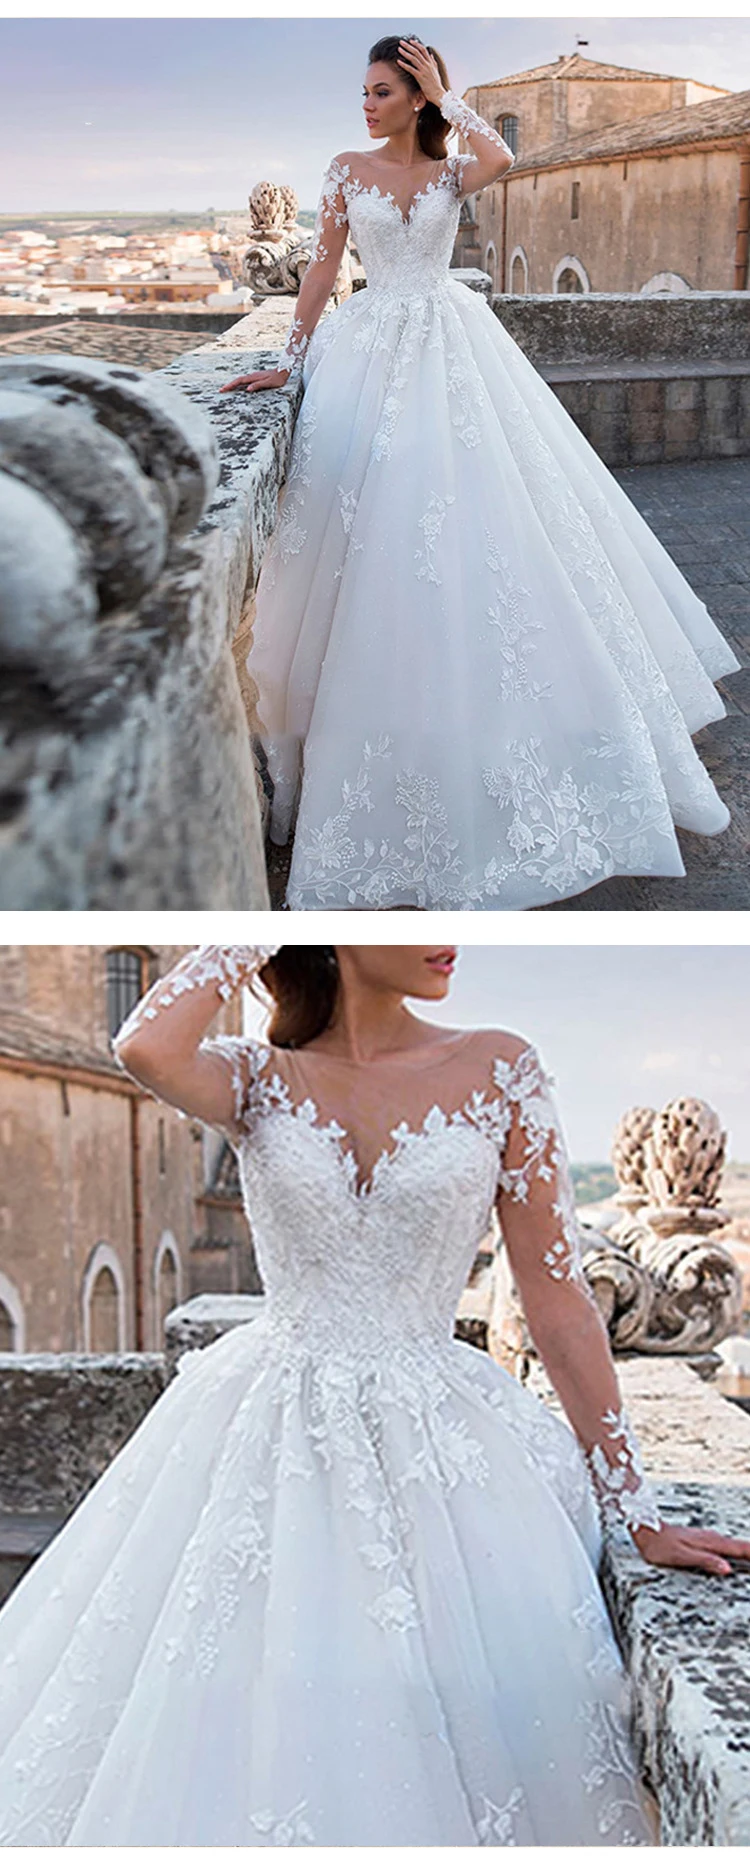 Luxury Bridal Ball Gown White Elegant Classic Long Tail V Neck Lace ...